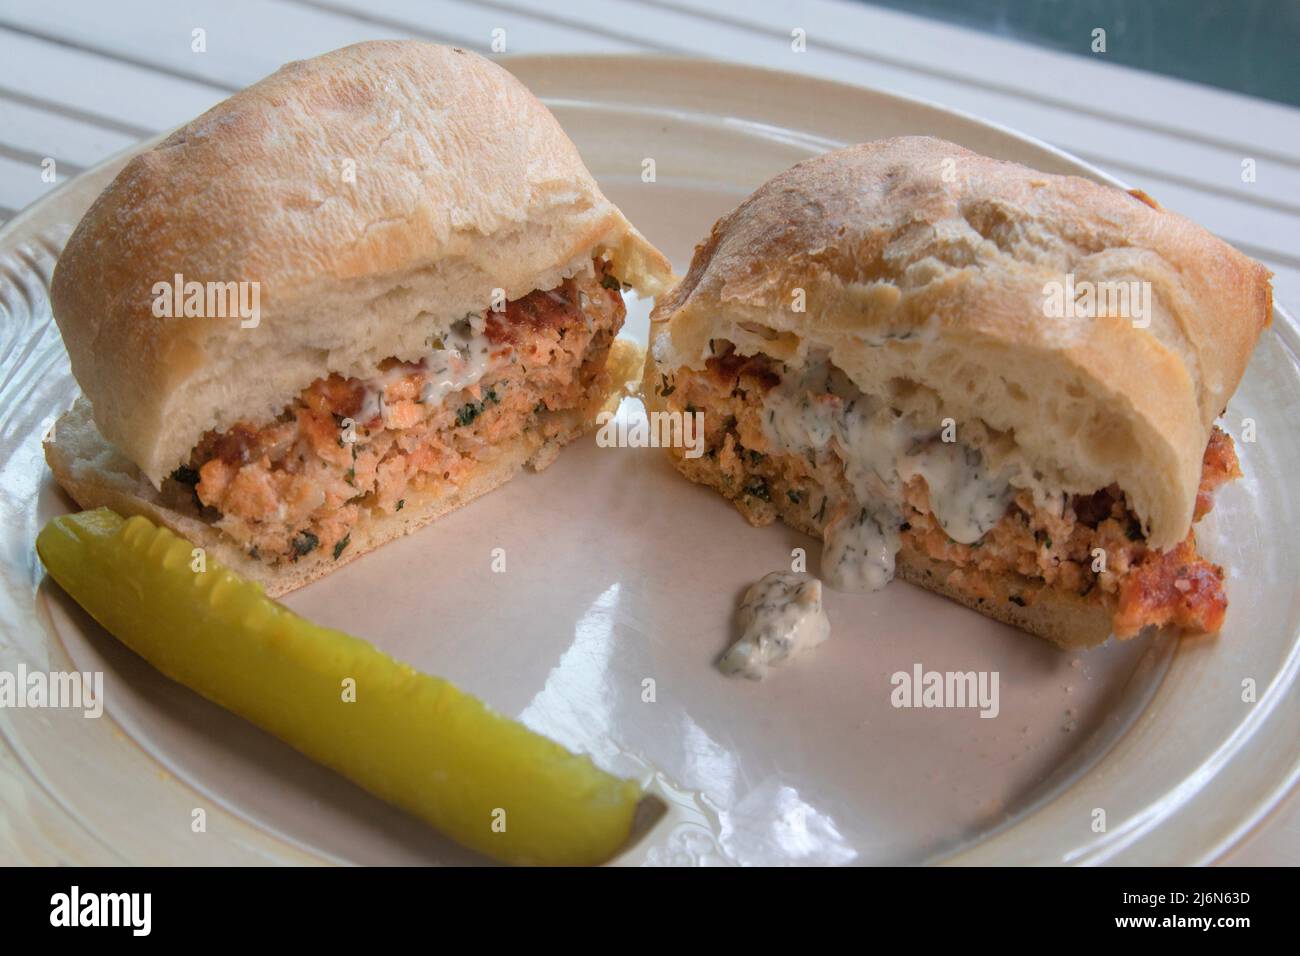 Grilled Salmon Burger on Ciabatta on natural white wood surface. Stock Photo